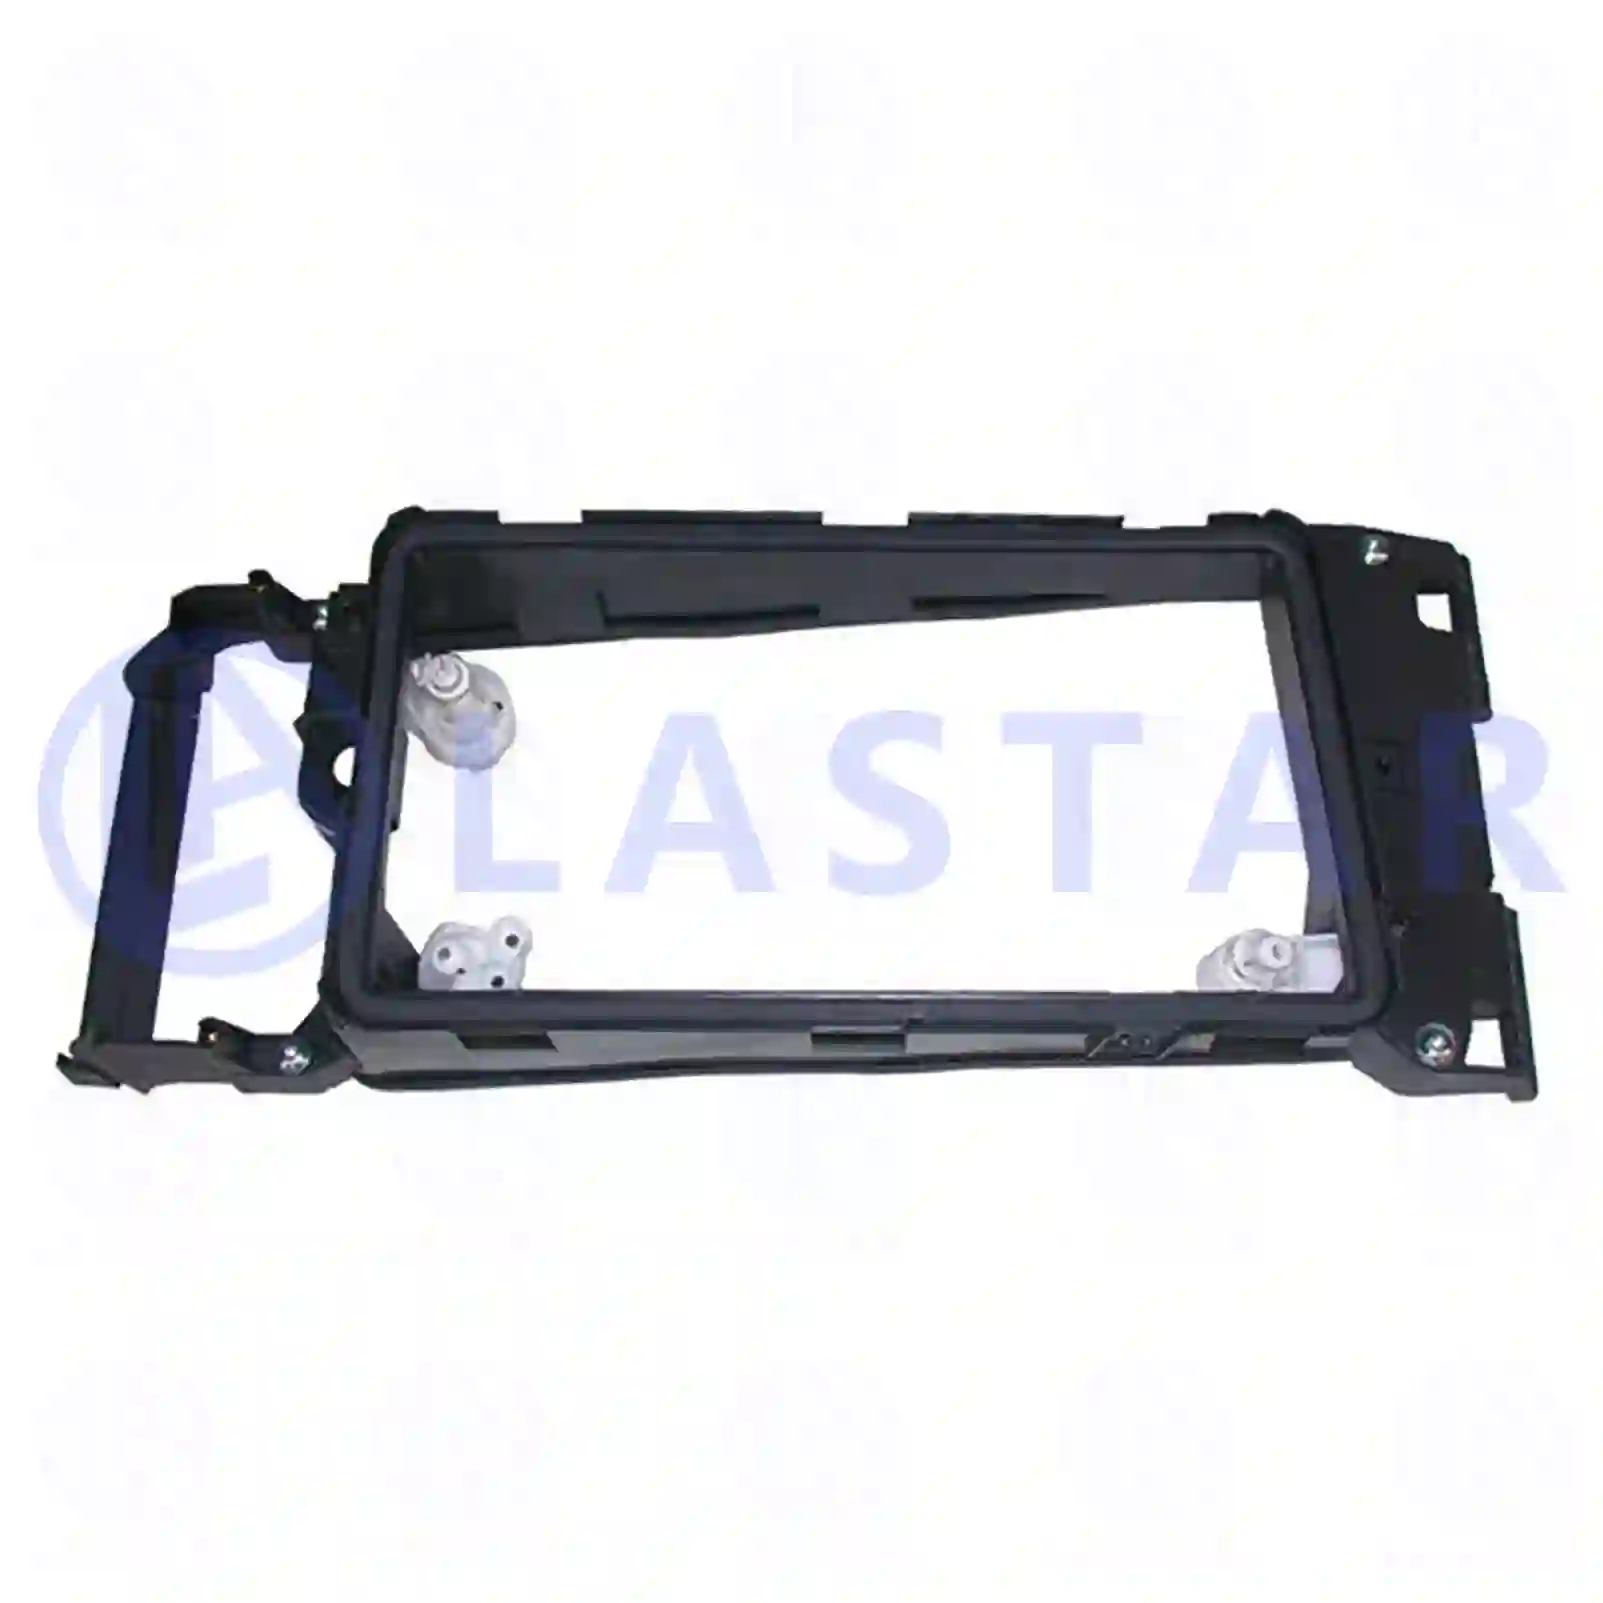 Lamp frame, right, 77712666, 1385403, ZG20068-0008 ||  77712666 Lastar Spare Part | Truck Spare Parts, Auotomotive Spare Parts Lamp frame, right, 77712666, 1385403, ZG20068-0008 ||  77712666 Lastar Spare Part | Truck Spare Parts, Auotomotive Spare Parts